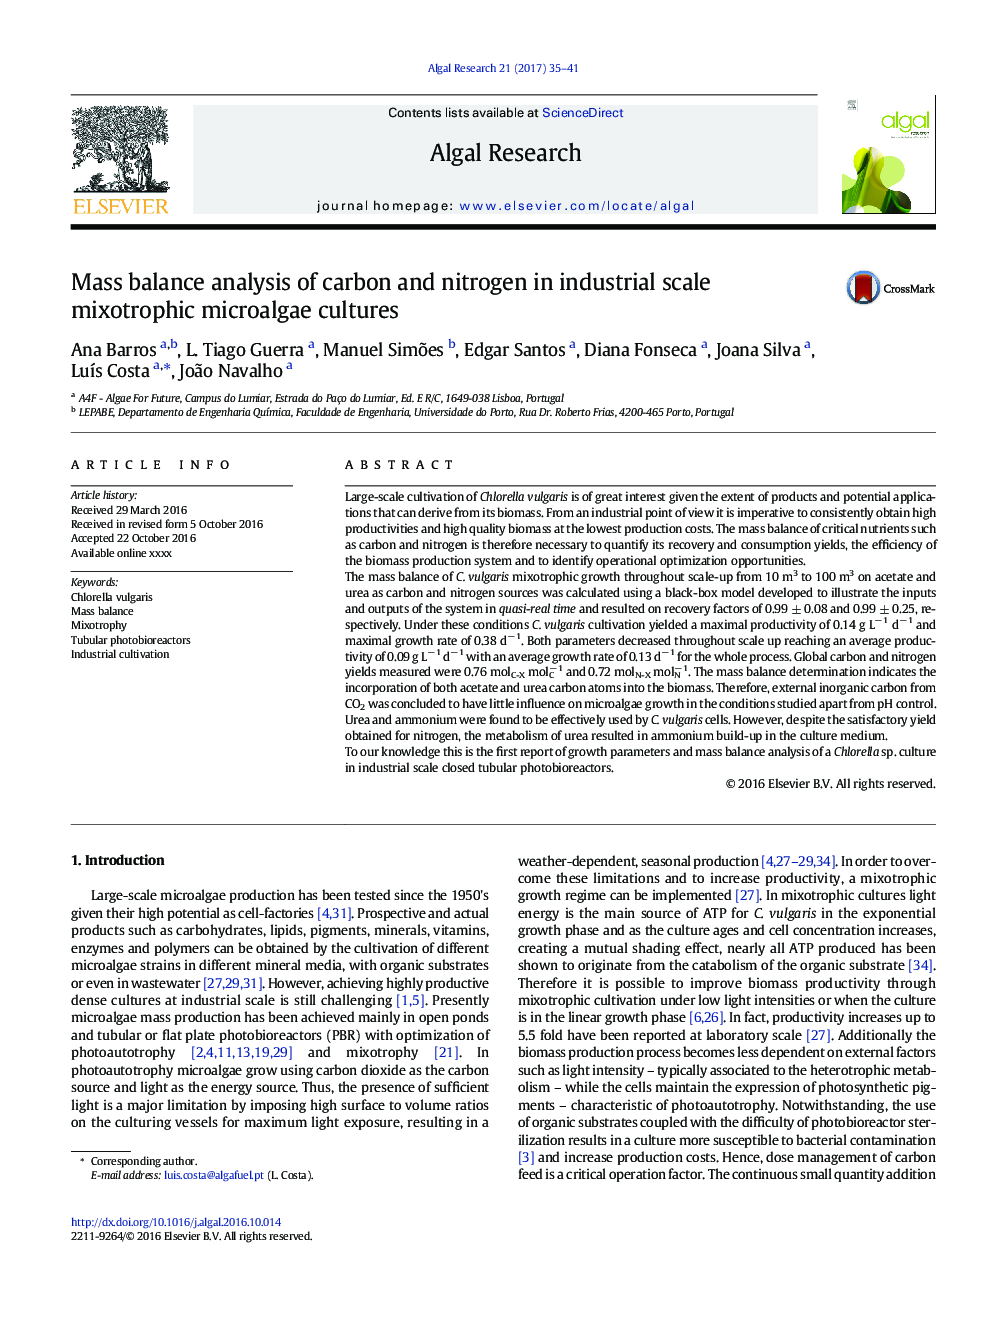 Mass balance analysis of carbon and nitrogen in industrial scale mixotrophic microalgae cultures